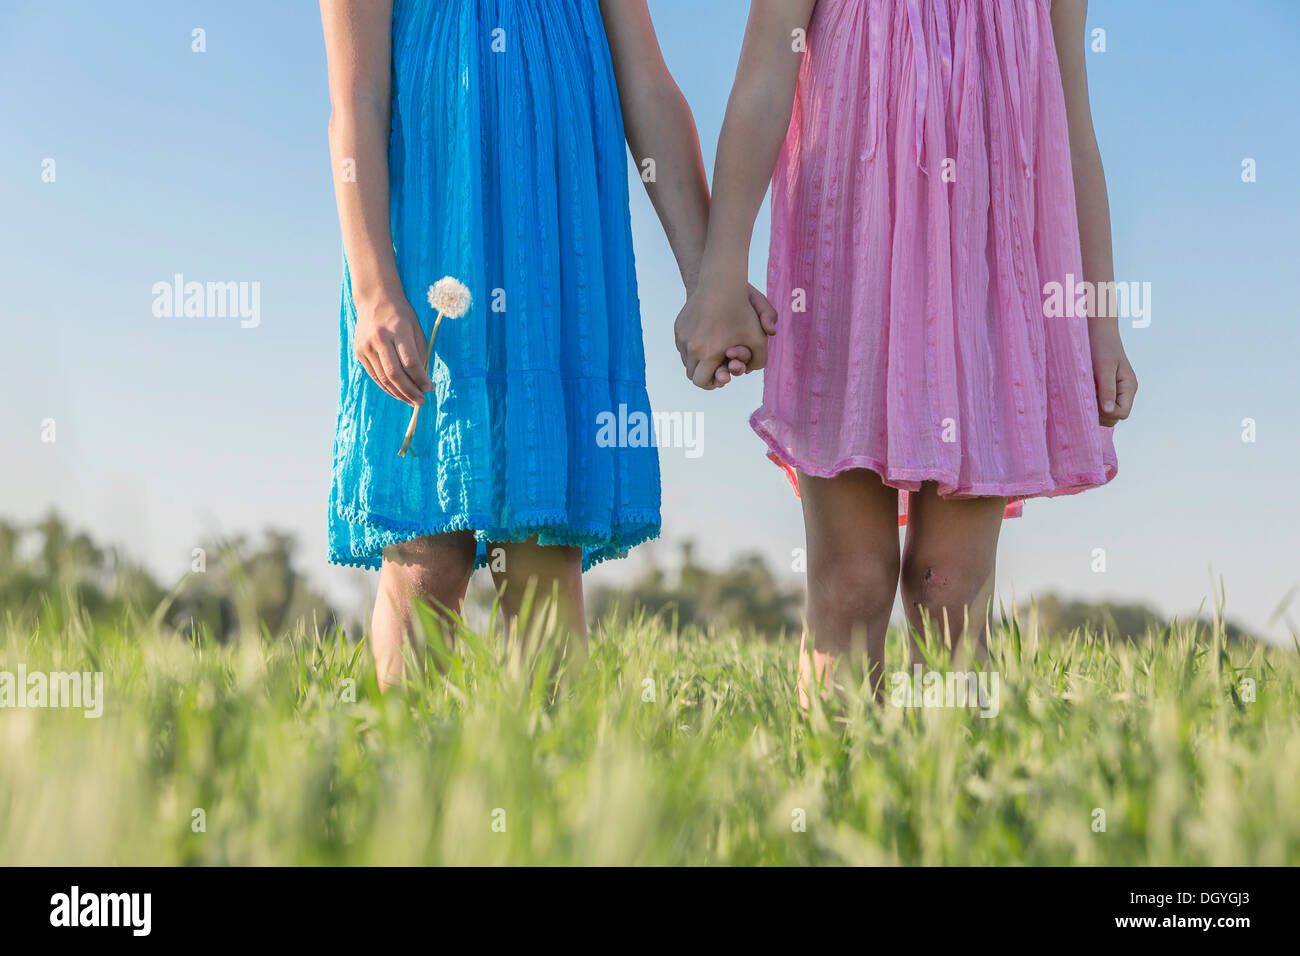 Twin sisters holding hands in a sunny field, low angle view Stock Photo